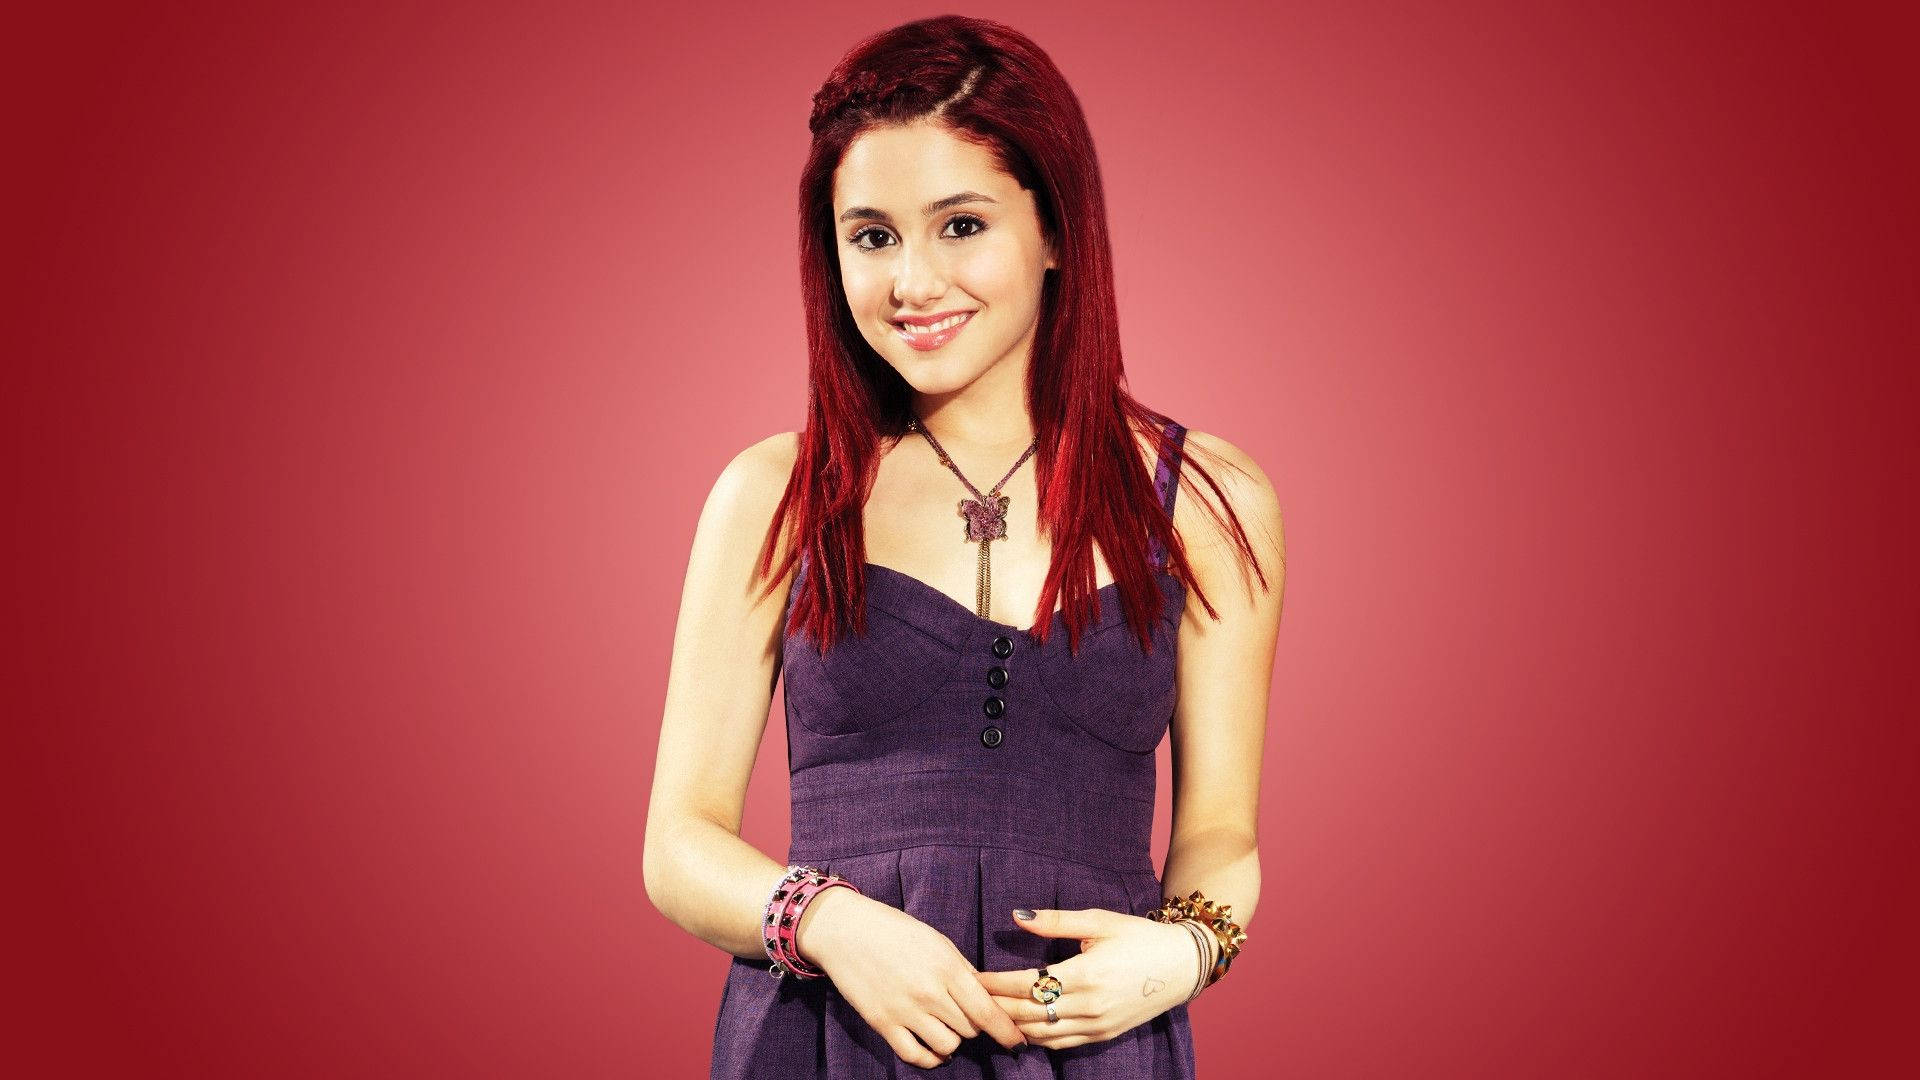 Ariana Grande Dazzles in Red Hair Wallpaper